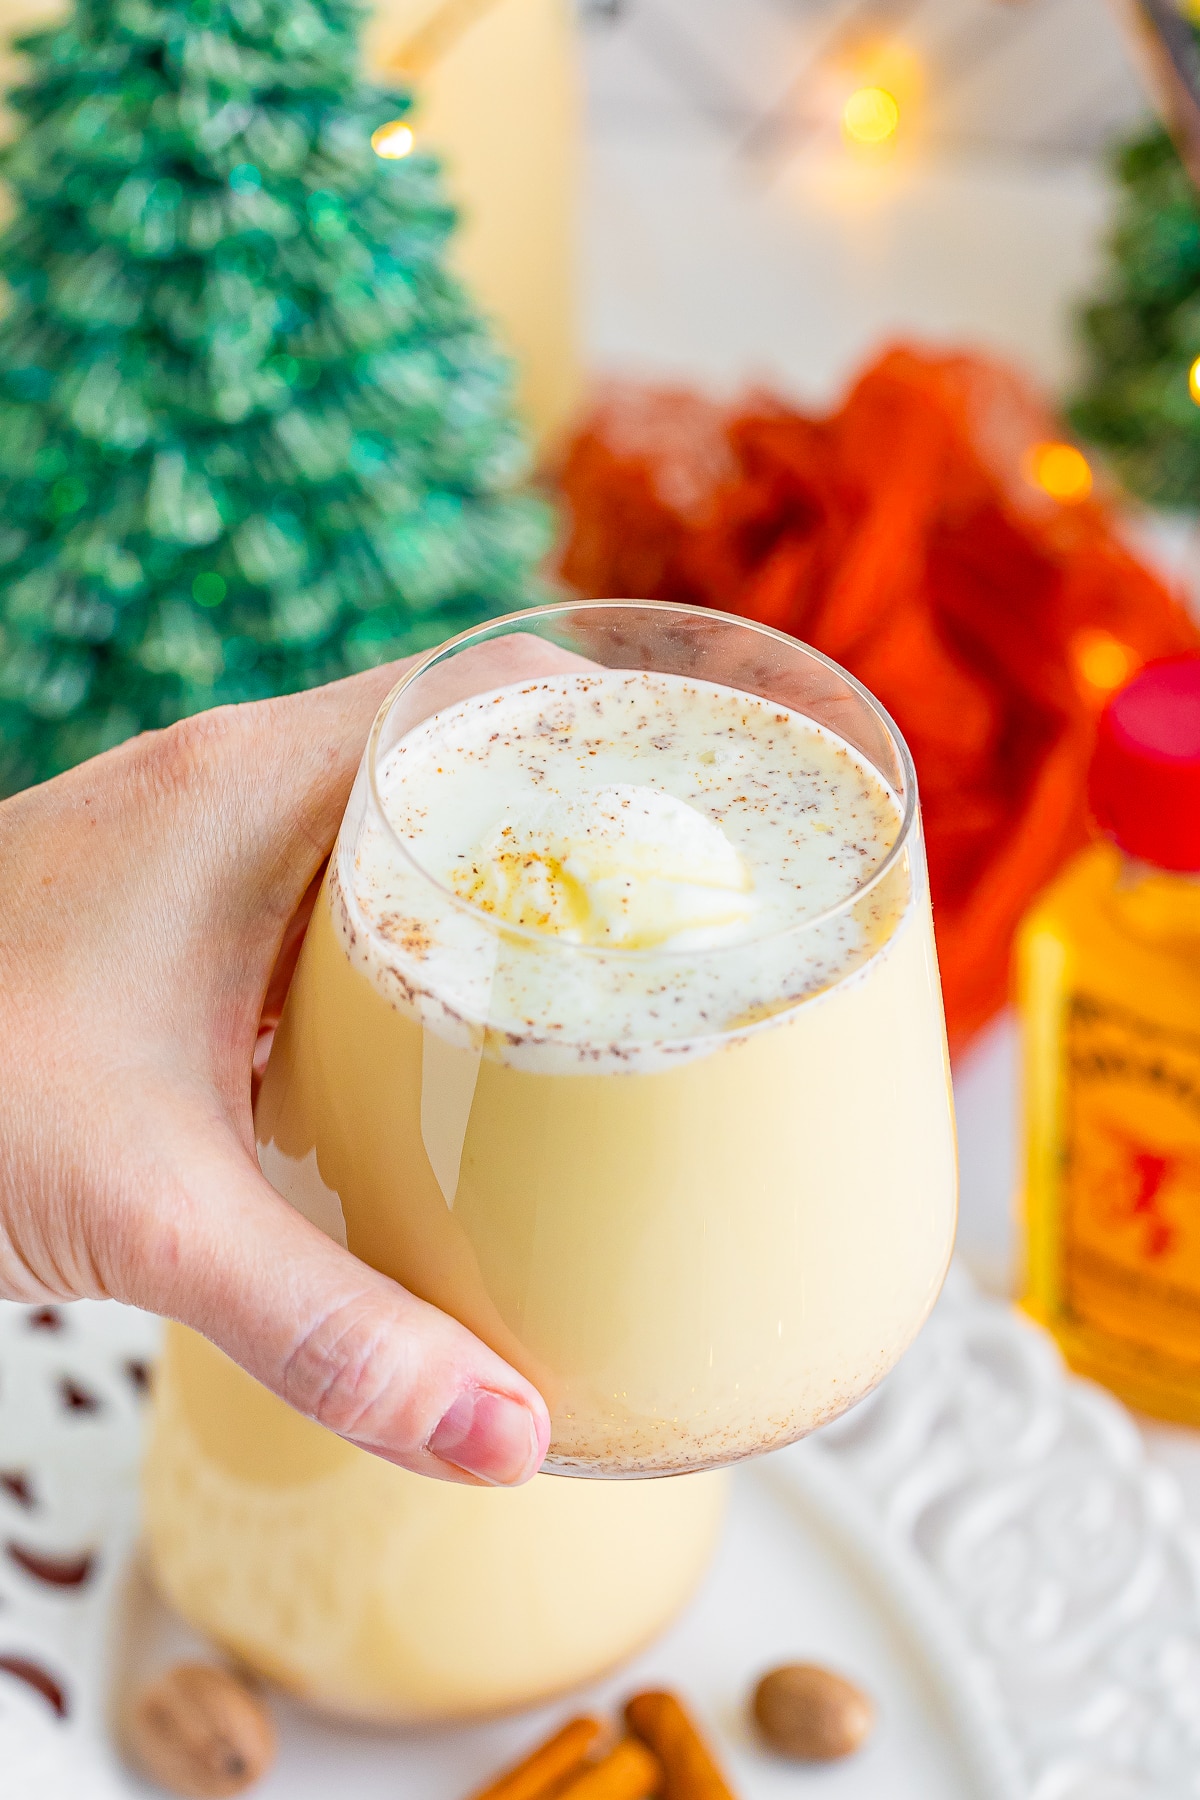 a hand holding up a glass full of christmas punch recipe in air